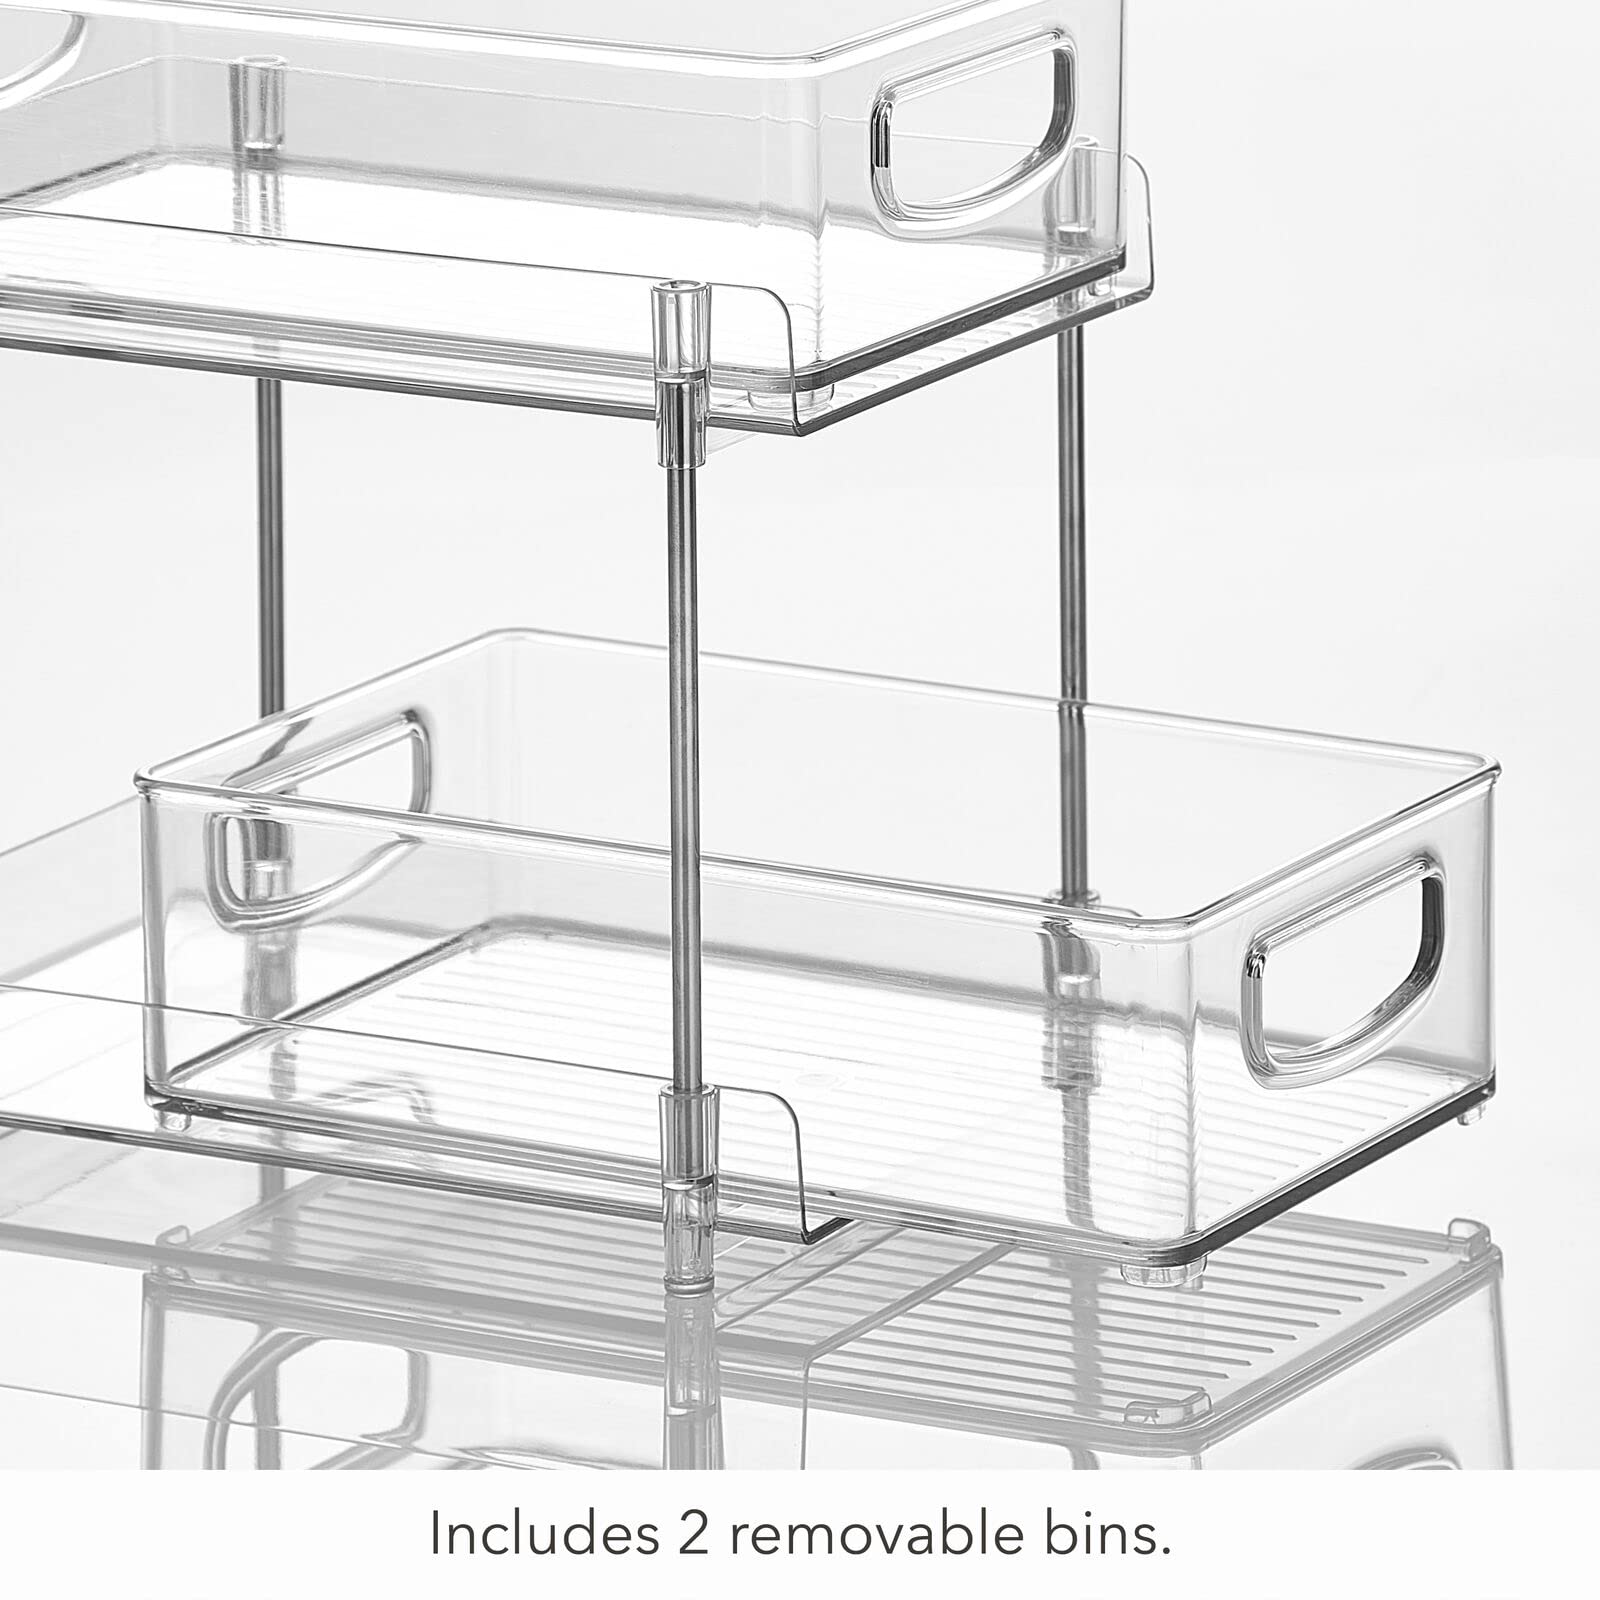 Nate Home by Nate Berkus 2-Tier Sliding Plastic Pull-Out Shallow Drawer Organizer | 2 Bins, Kitchen Cabinet Organizer and Pantry Storage from mDesign - Clear/Polished Stainless Steel